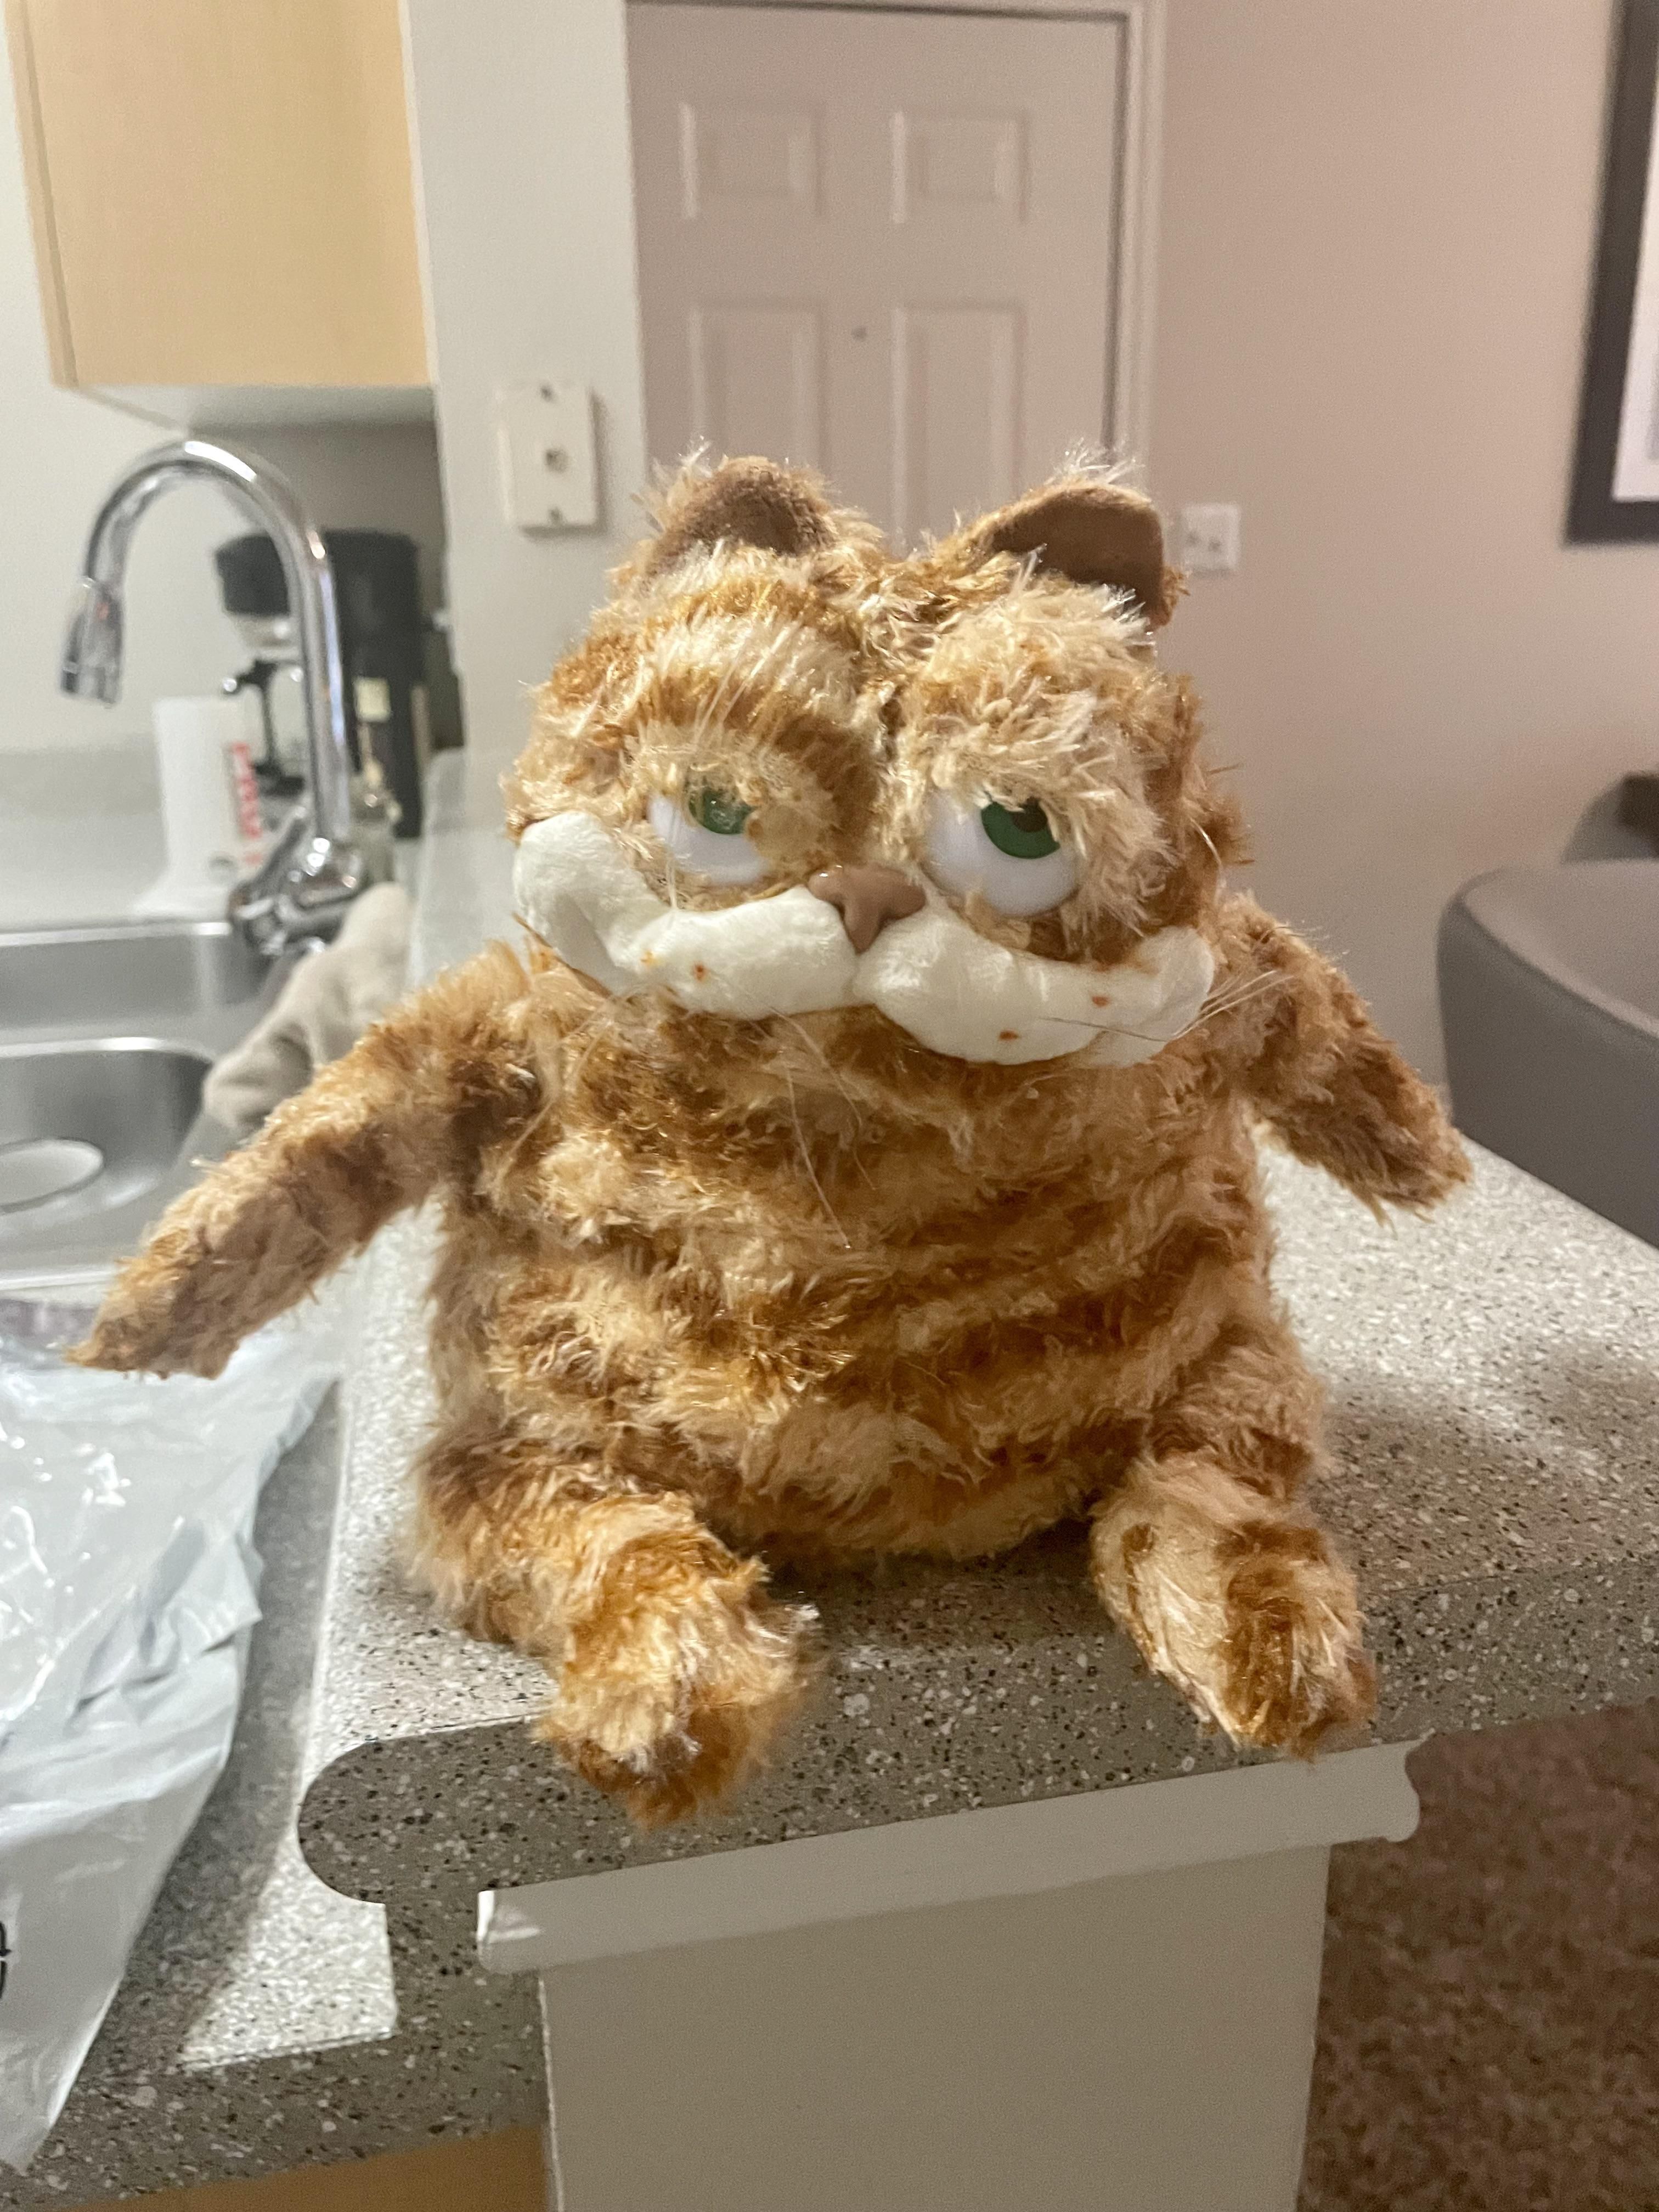 This new Garfield plush that I just purchased for my dog